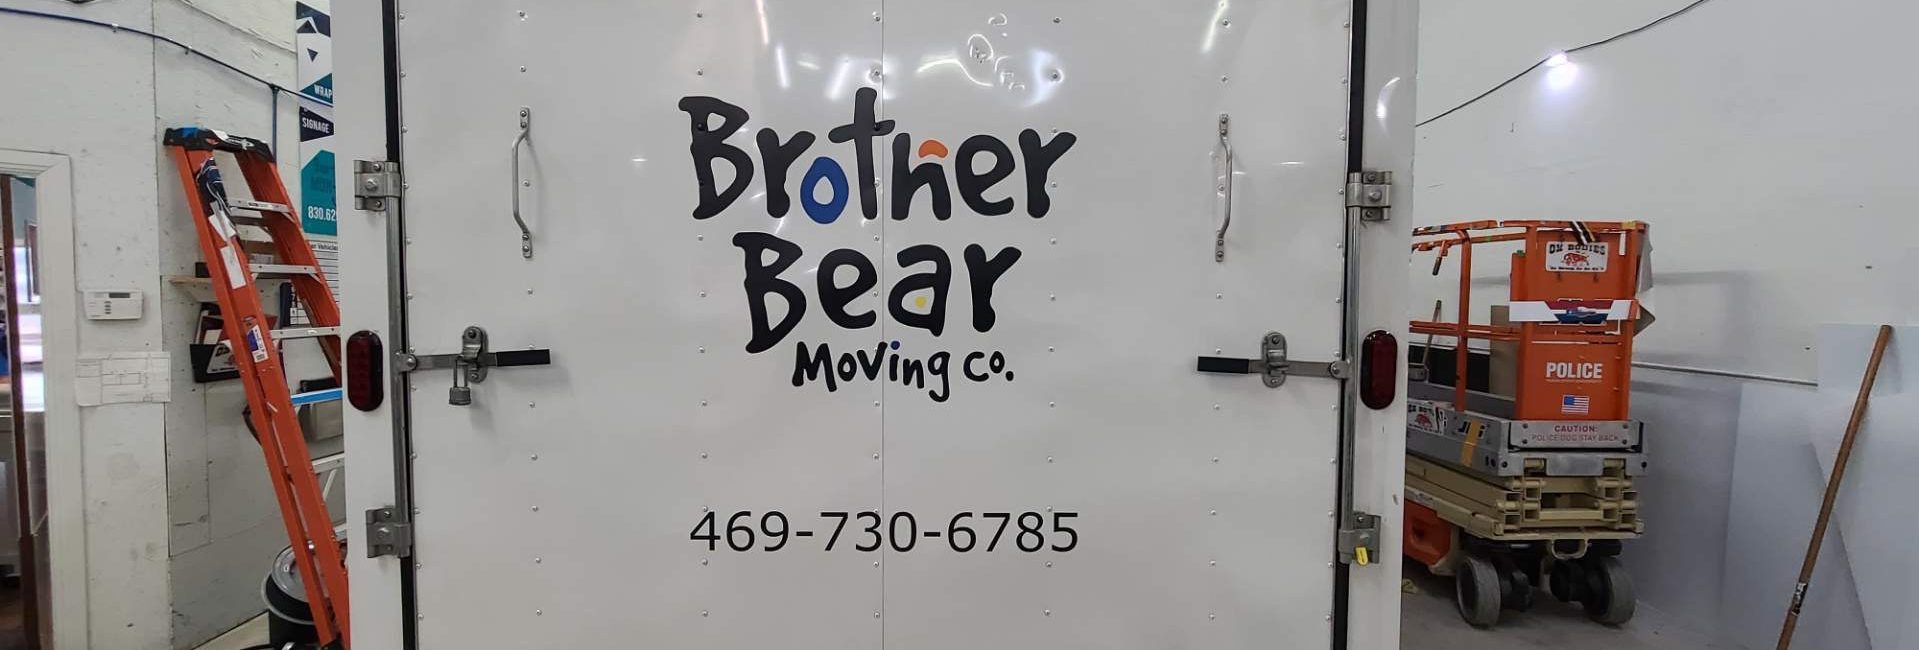 Brother Bear Moving 4